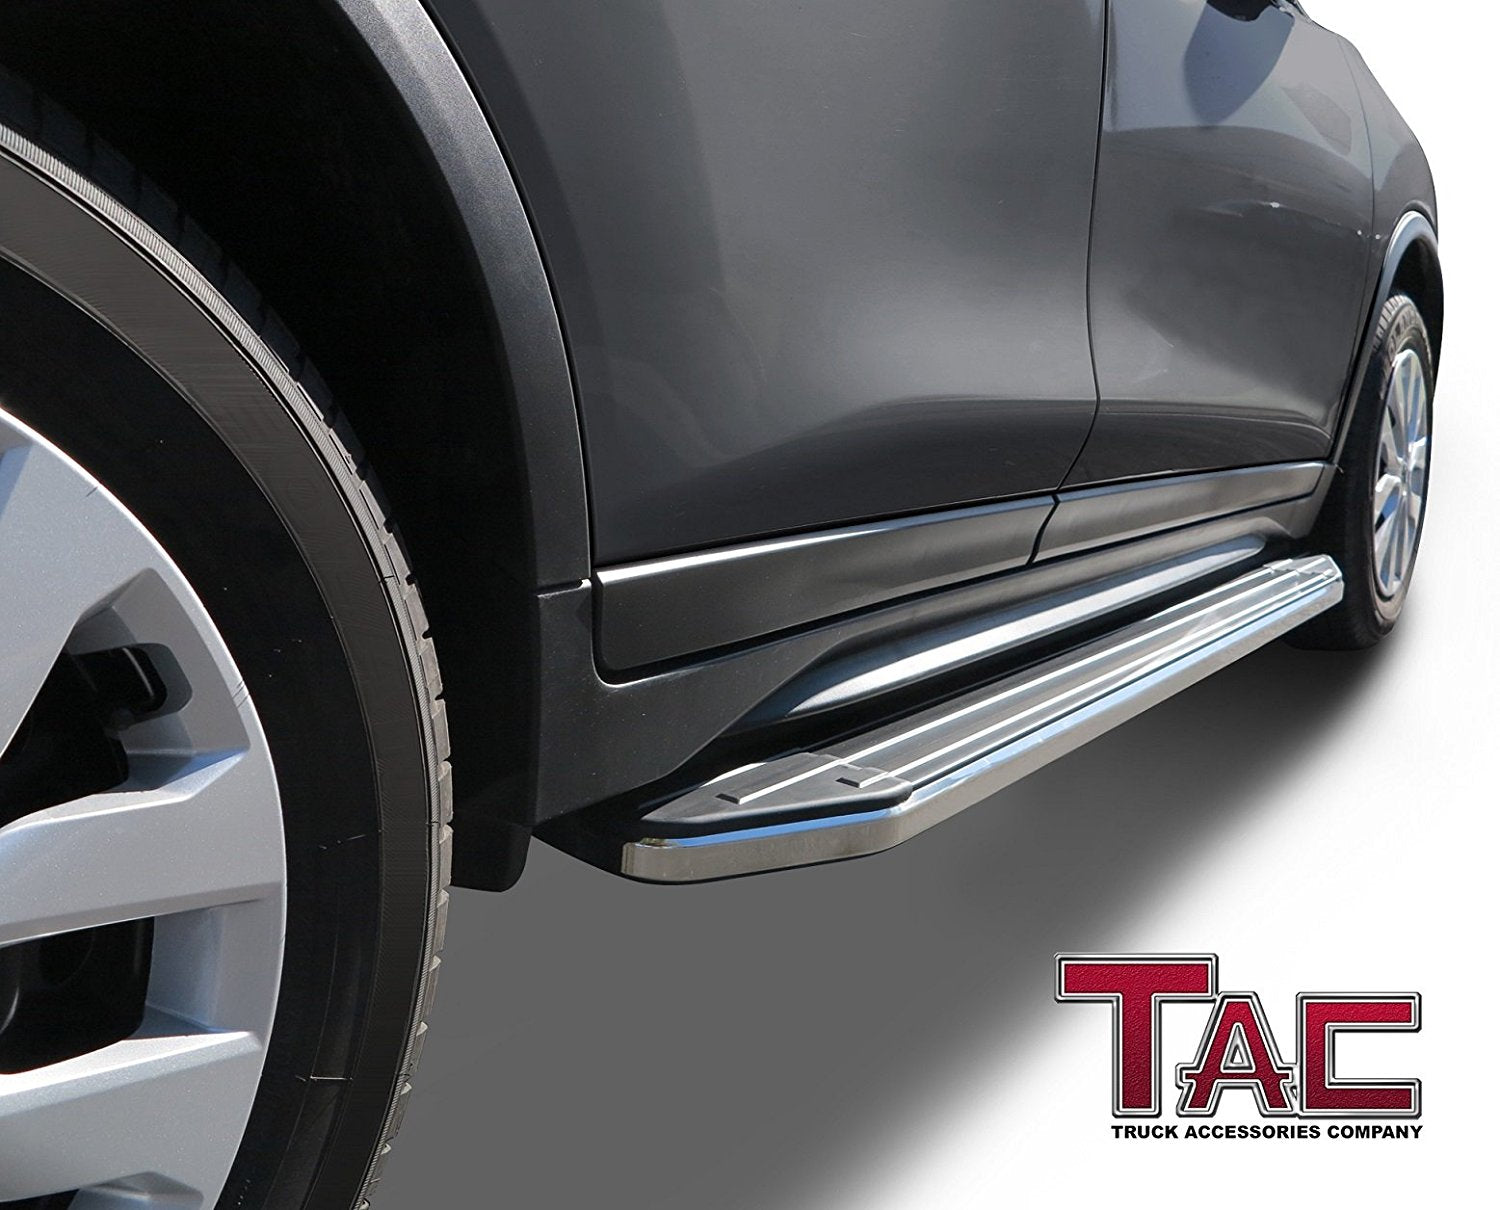 TAC ViewPoint Running Boards Fit 2007-2014 Ford Edge (Excl. Sport and EcoBoost Models) SUV | Side Steps | Nerf Bars | Side Bars - 0